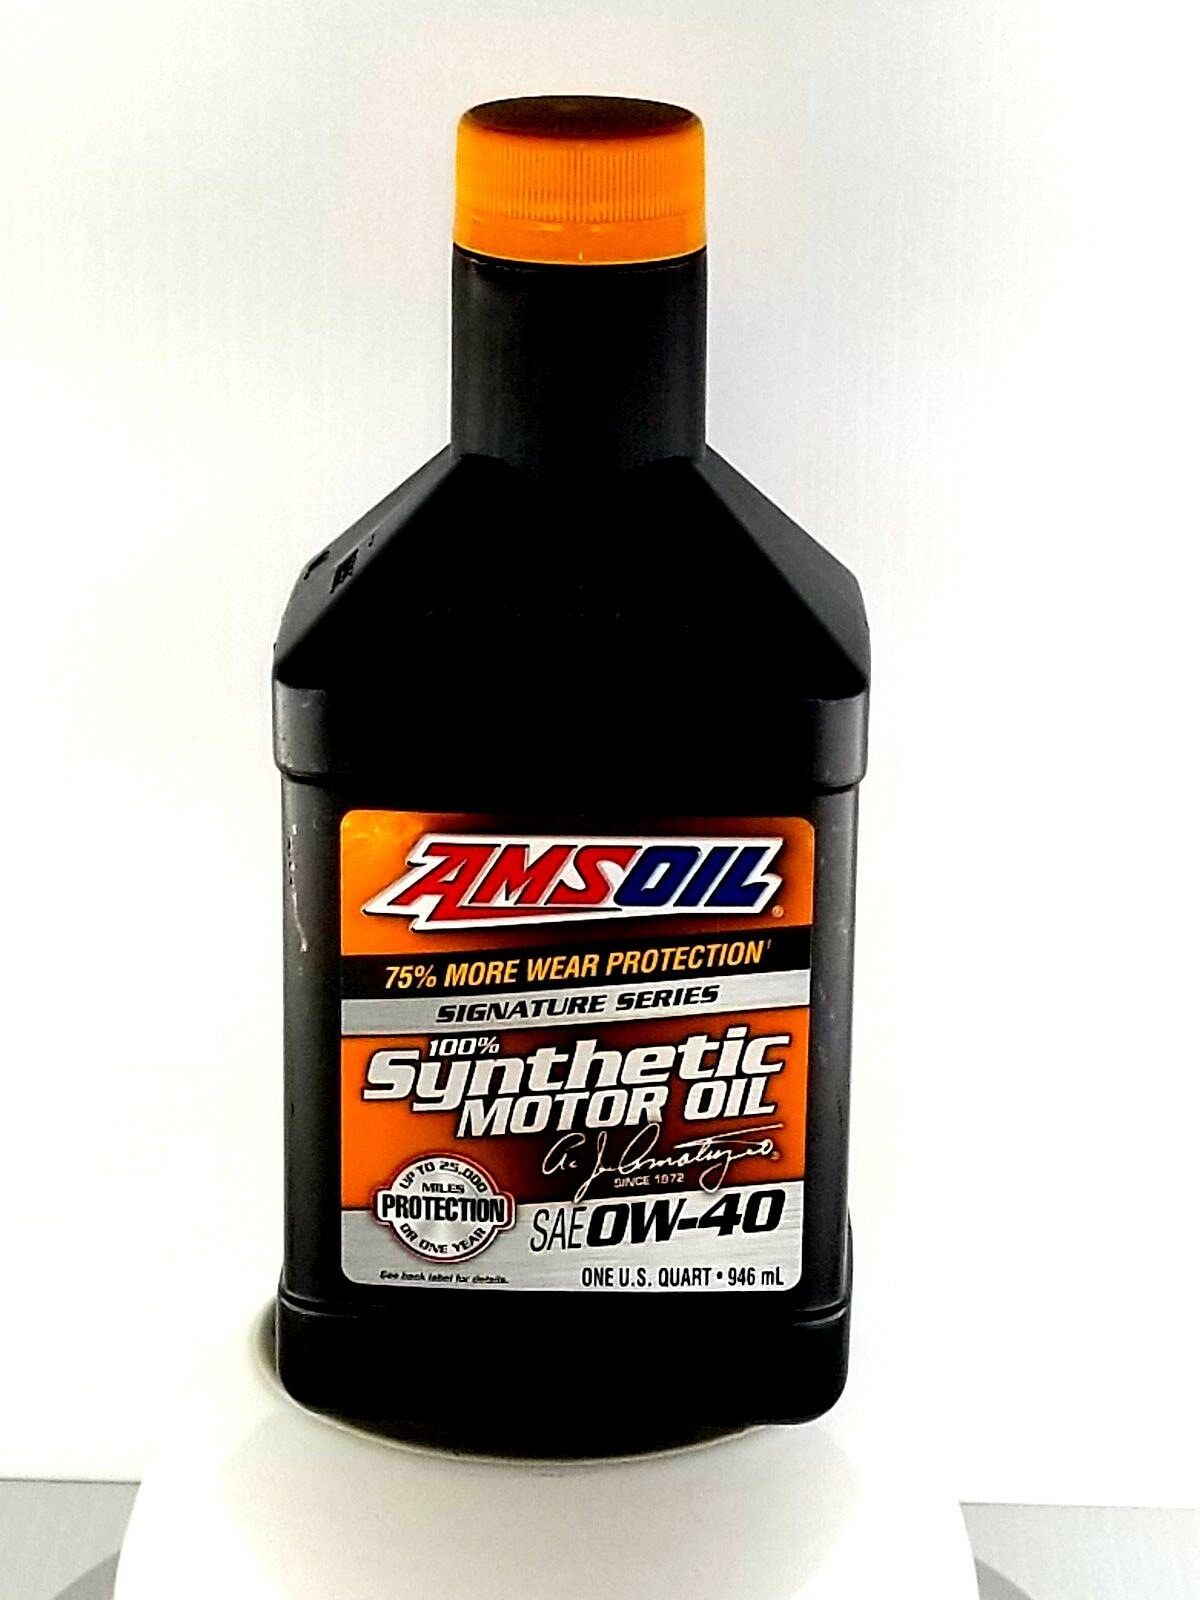 Amsoil signature series synthetic. AMSOIL 0w40. AMSOIL 20w40. AMSOIL Signature Series 0w-40. AMSOIL 0w40 1л.